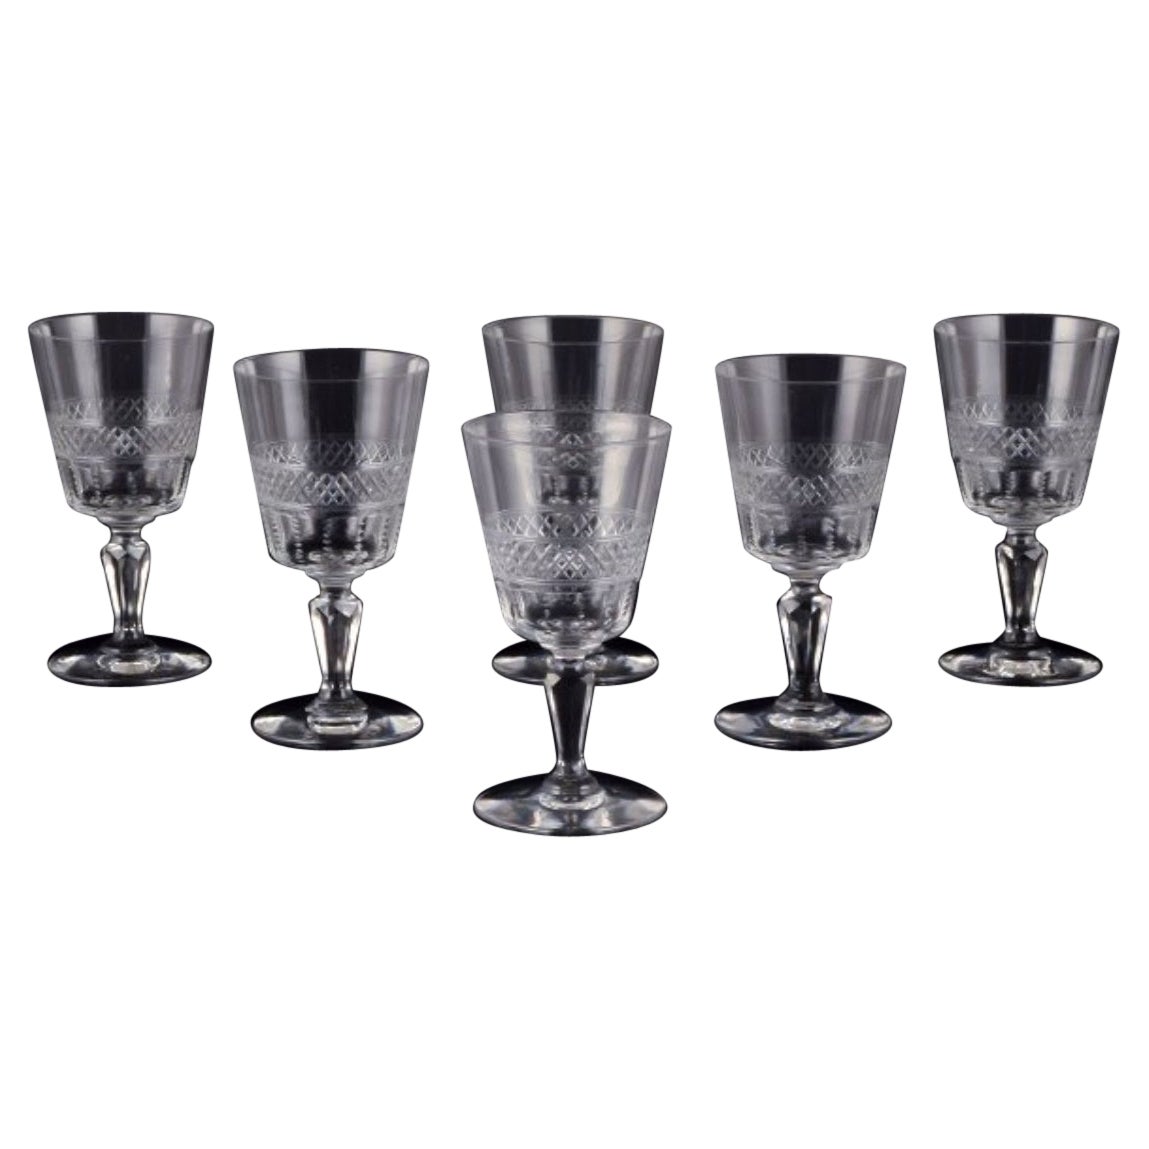 Set of six mouth-blown French white wine glasses in crystal glass.